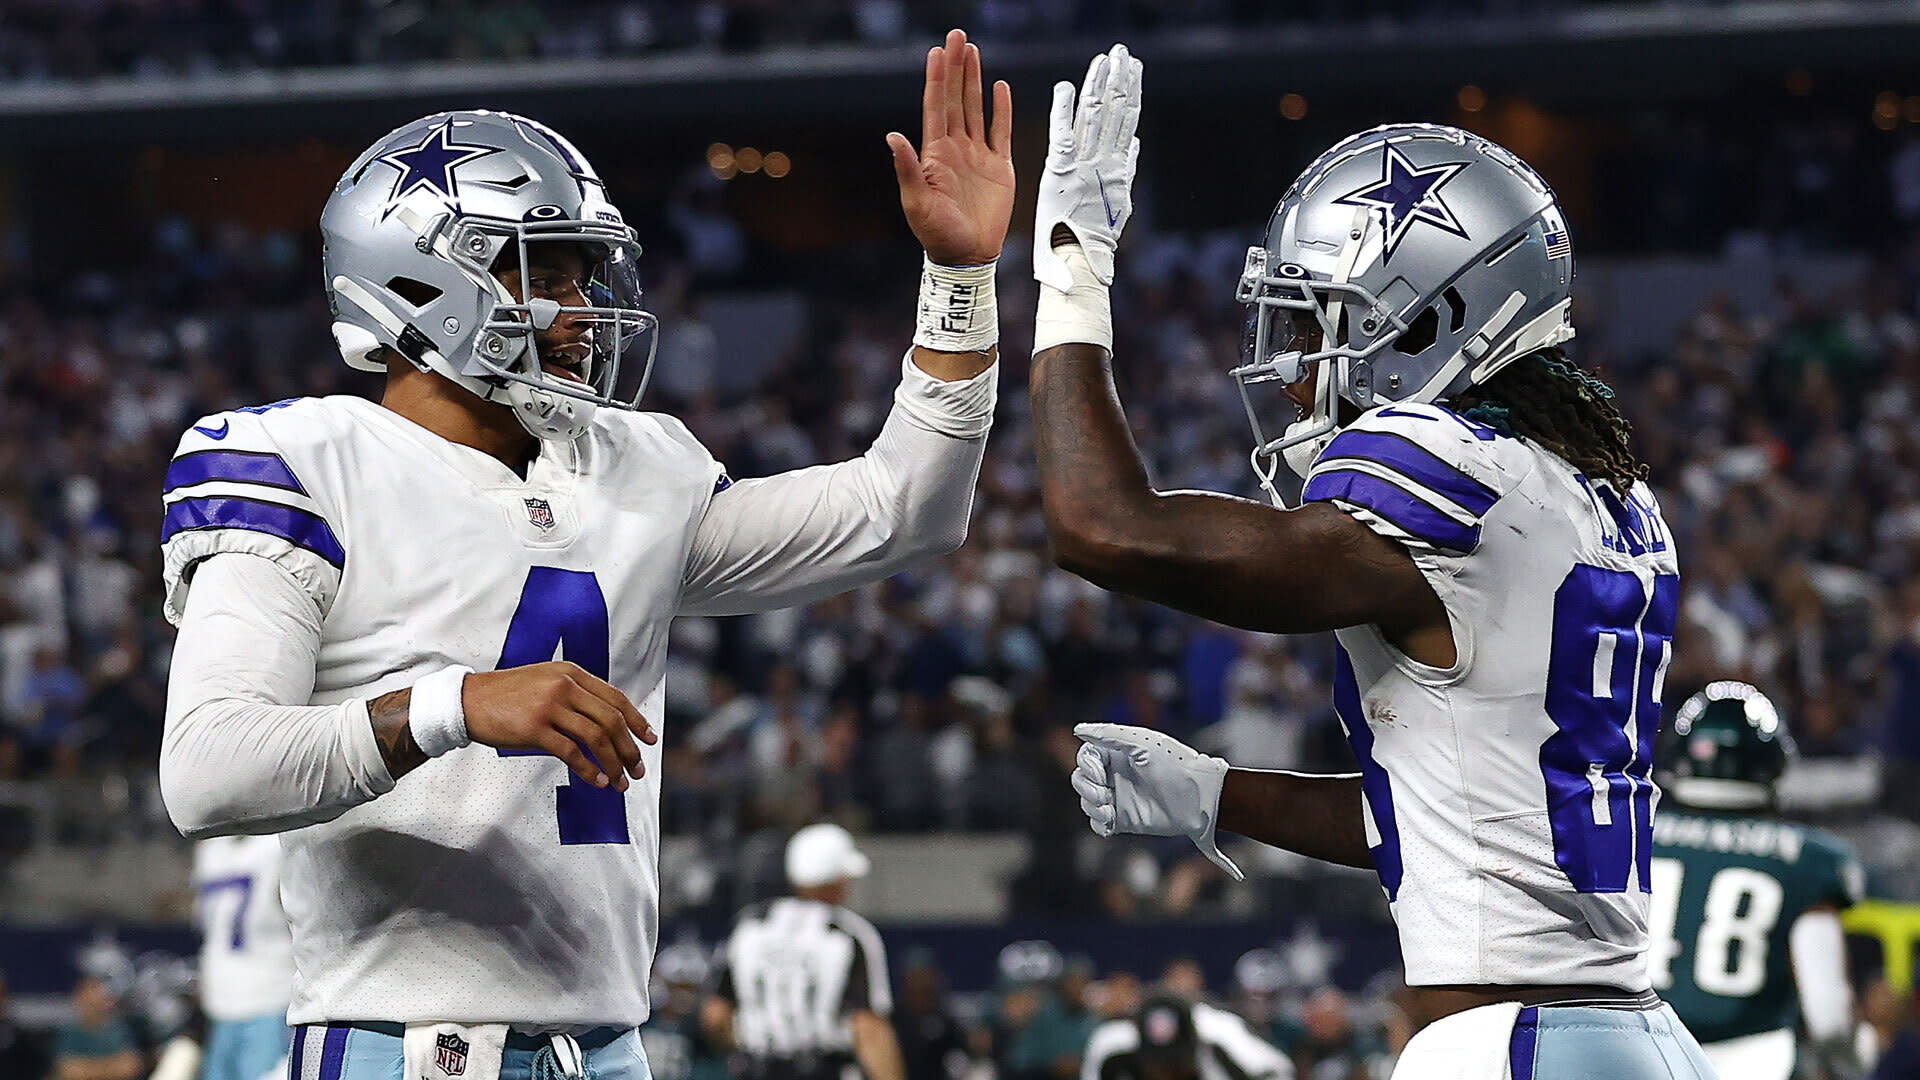 Cowboys vs. Eagles: “Jalen Hurts is probably only going to get the